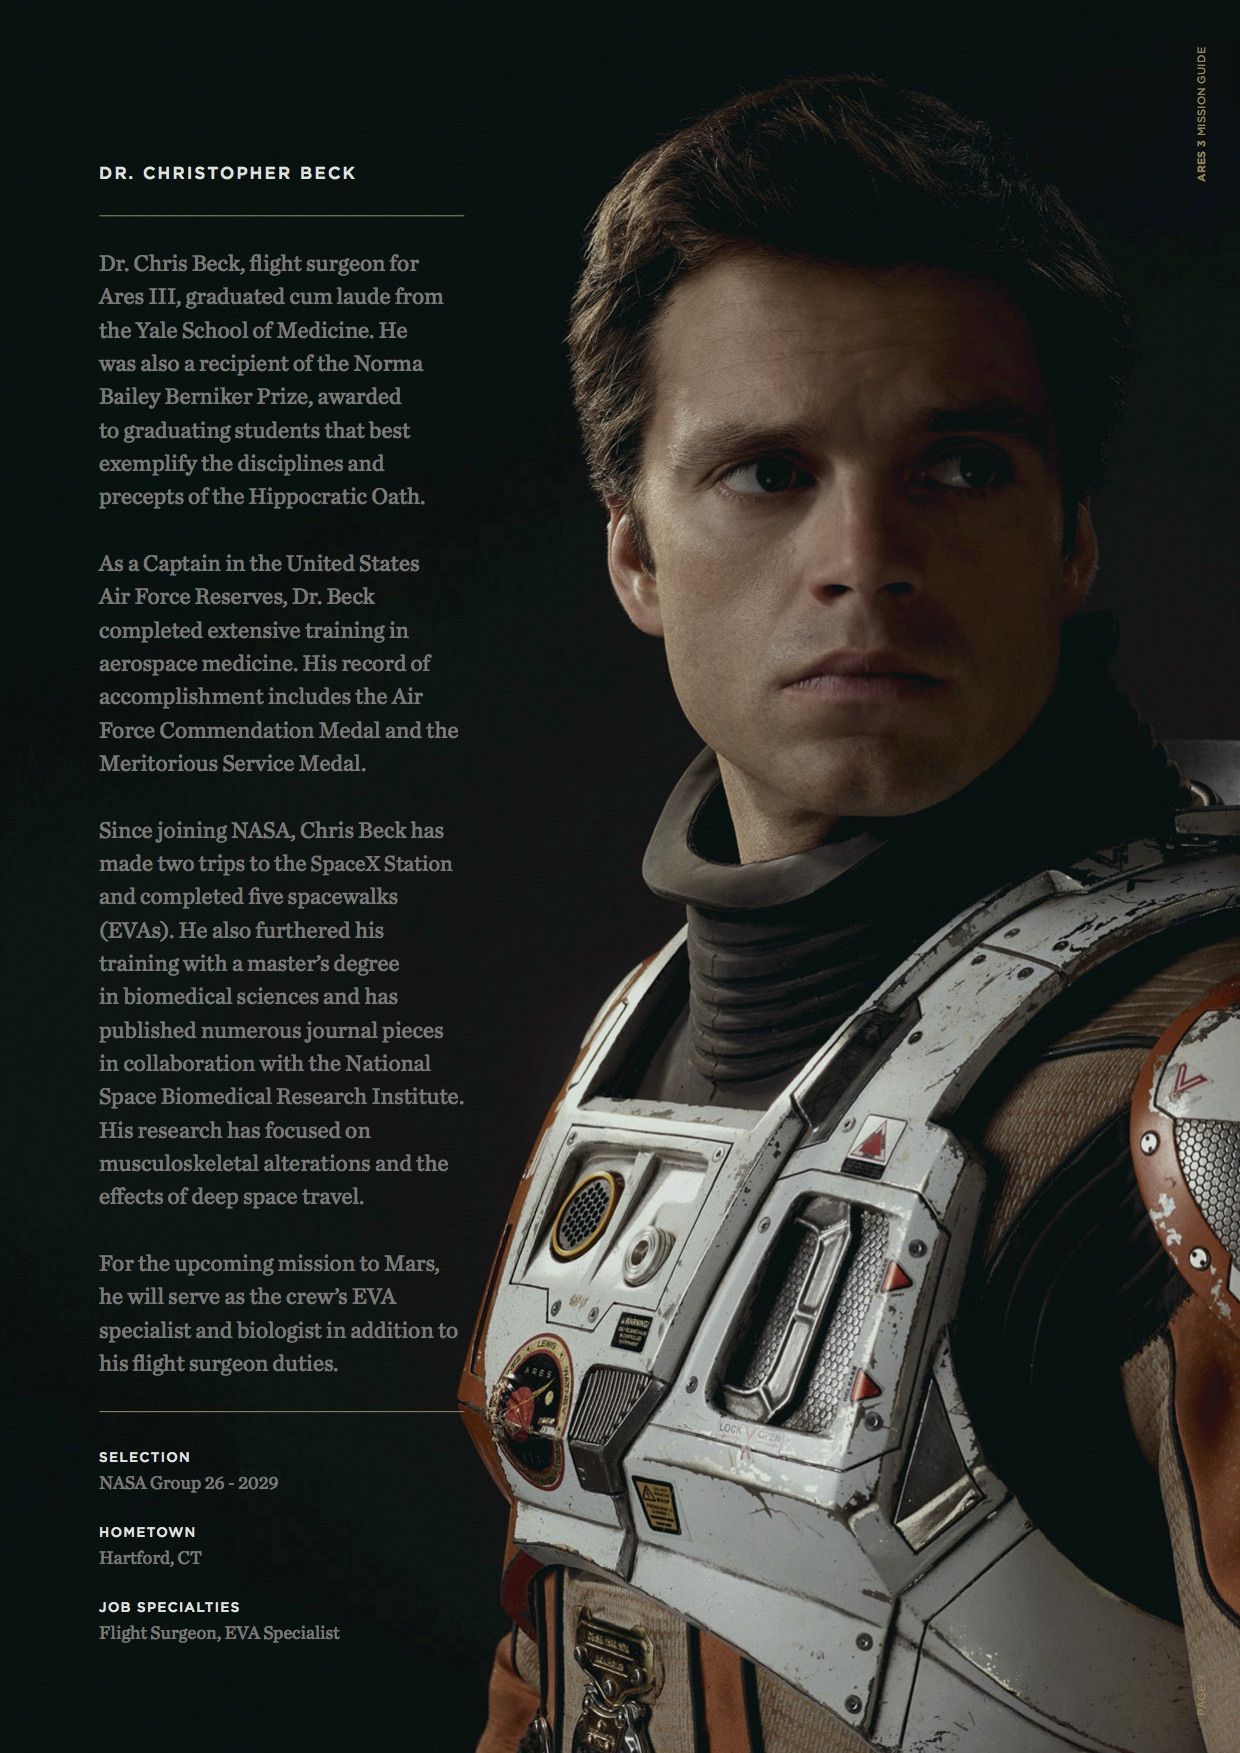 The Martian Mission Guide Biography Chris Beck